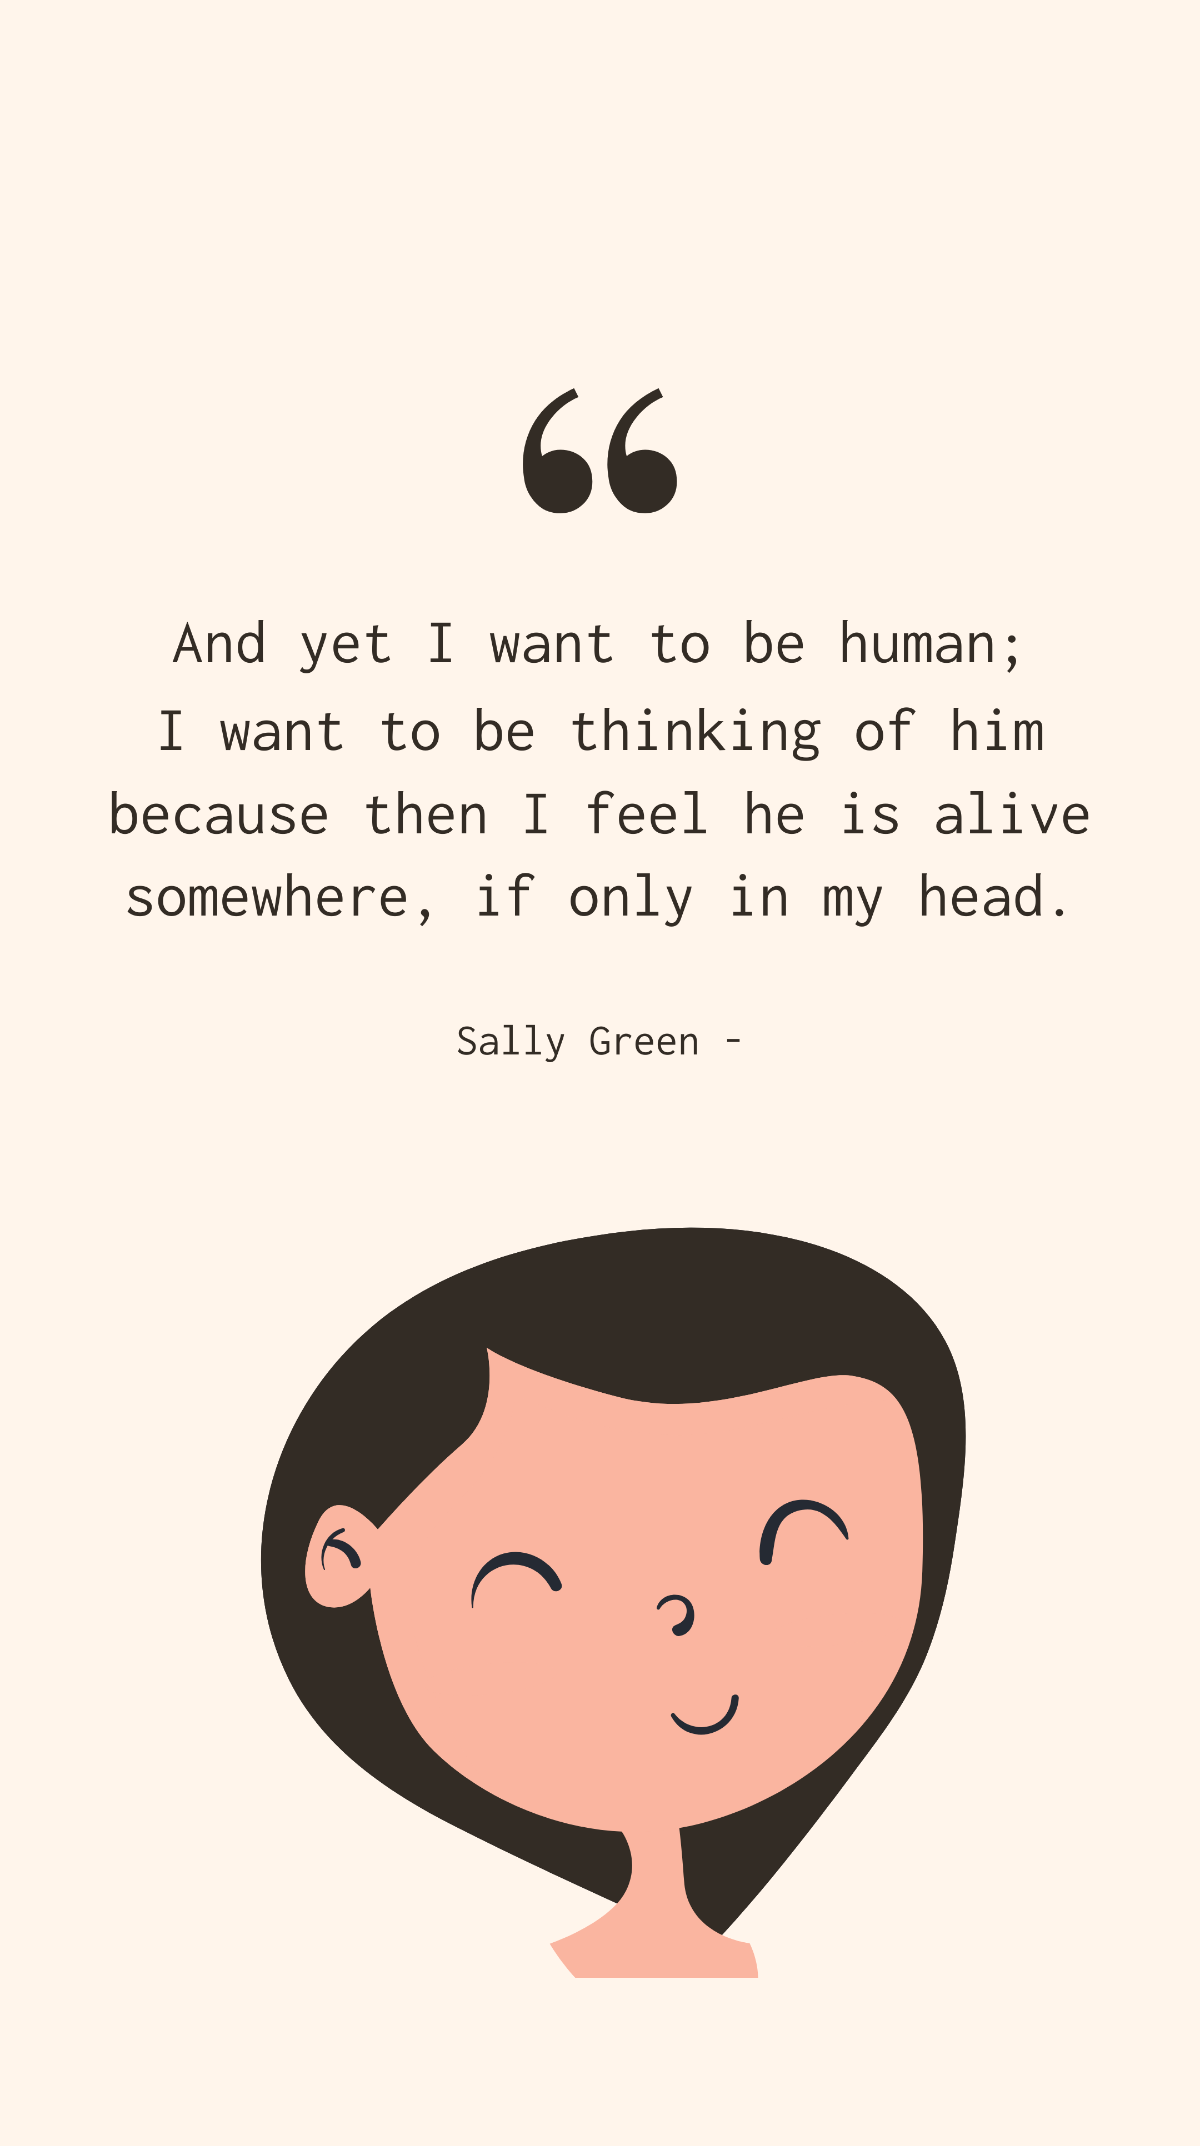 Sally Green - And yet I want to be human; I want to be thinking of him because then I feel he is alive somewhere, if only in my head. Template